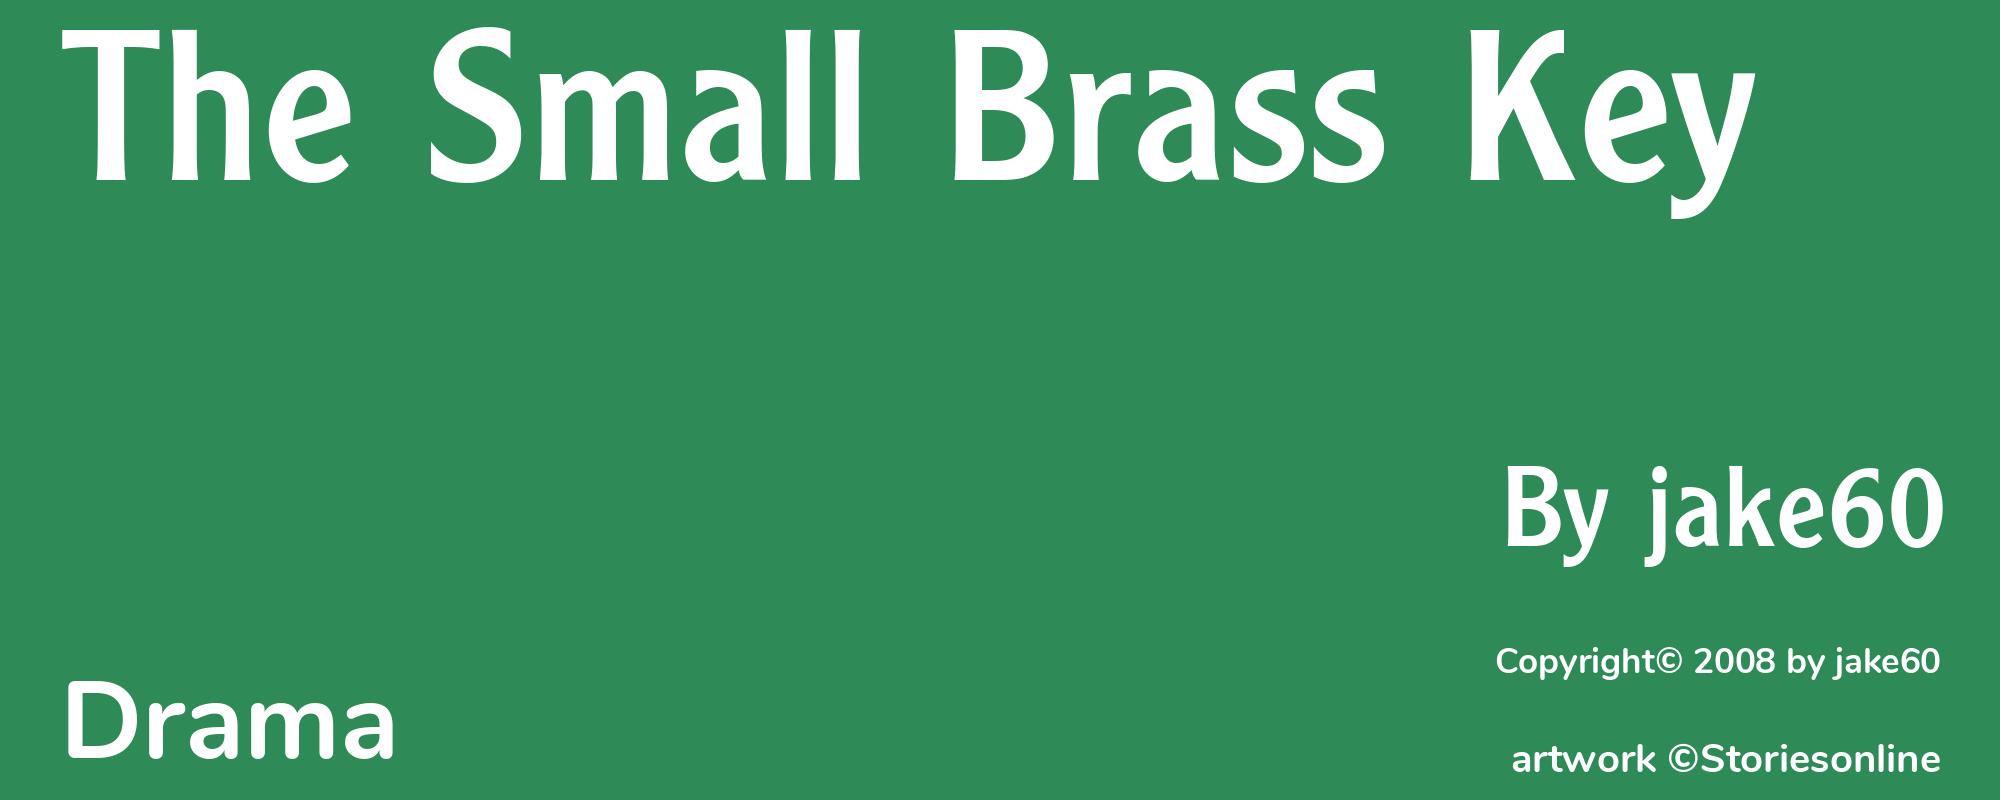 The Small Brass Key - Cover